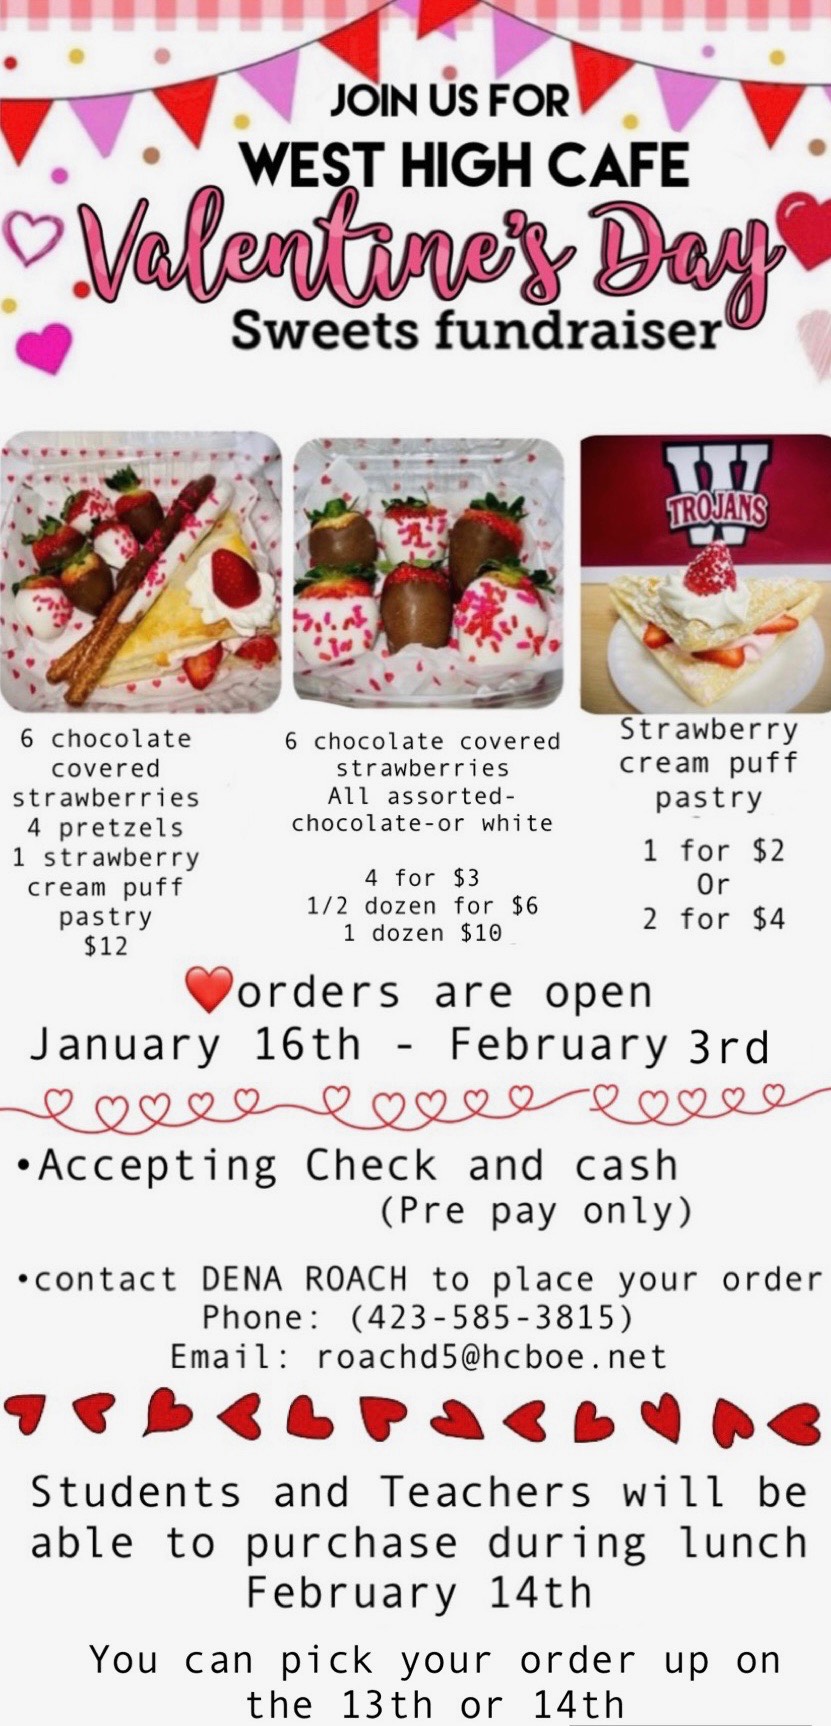 Valentines Day fundraiser in cafeteria Feb. 14 during lunch.